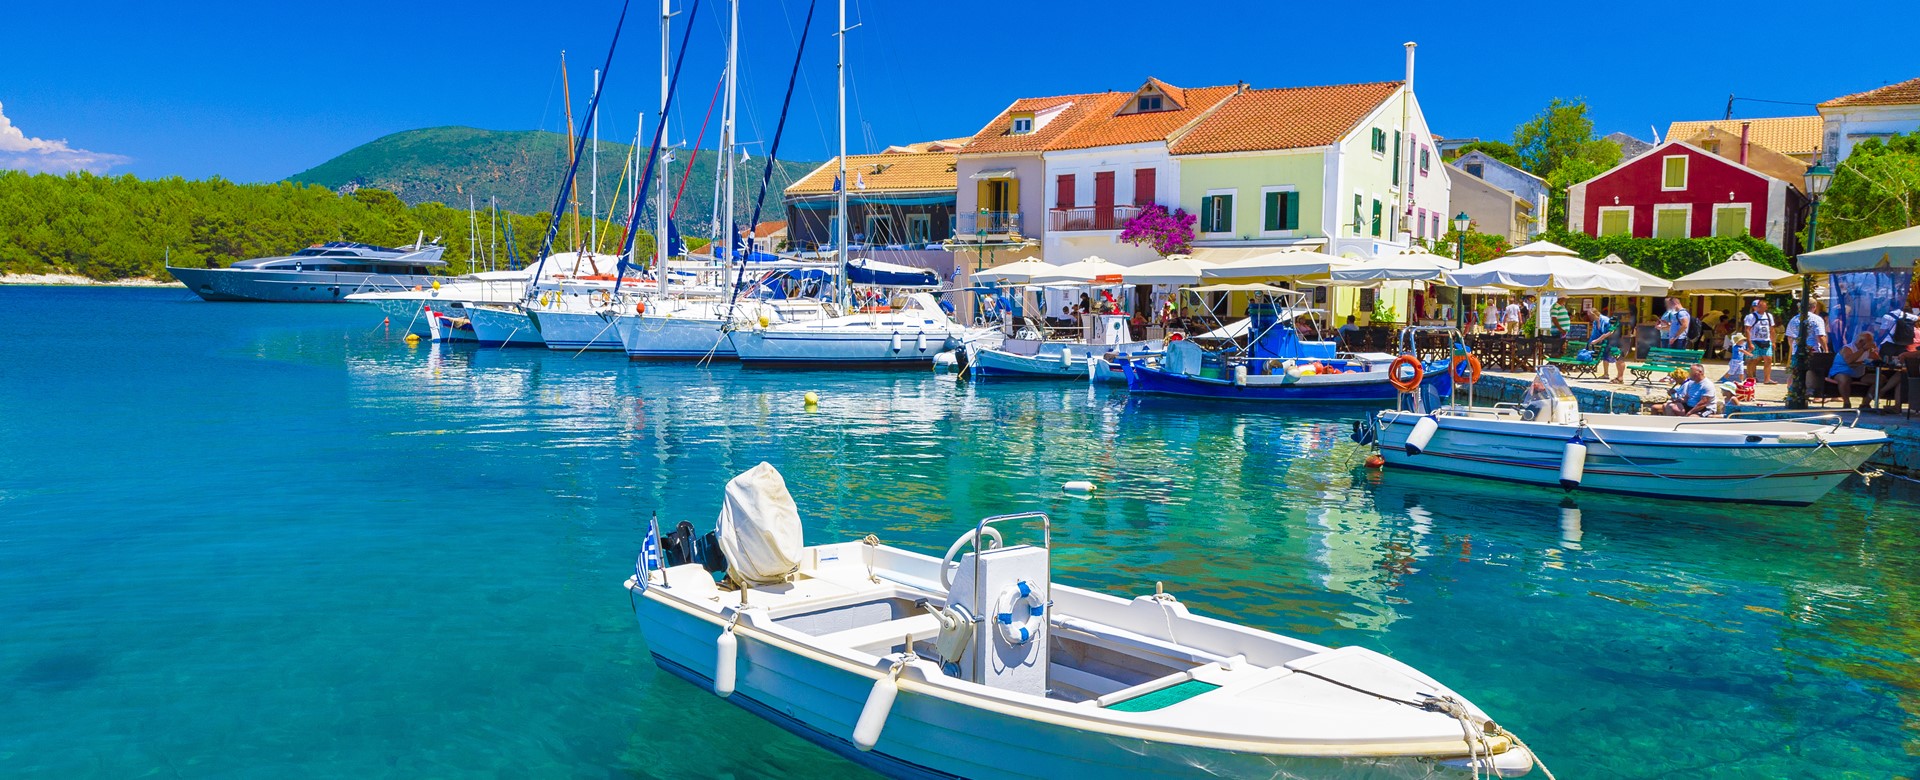 Boats for hire and charter in Fiskardo village harbor, Kefalonia, Greek Islands and boat hire